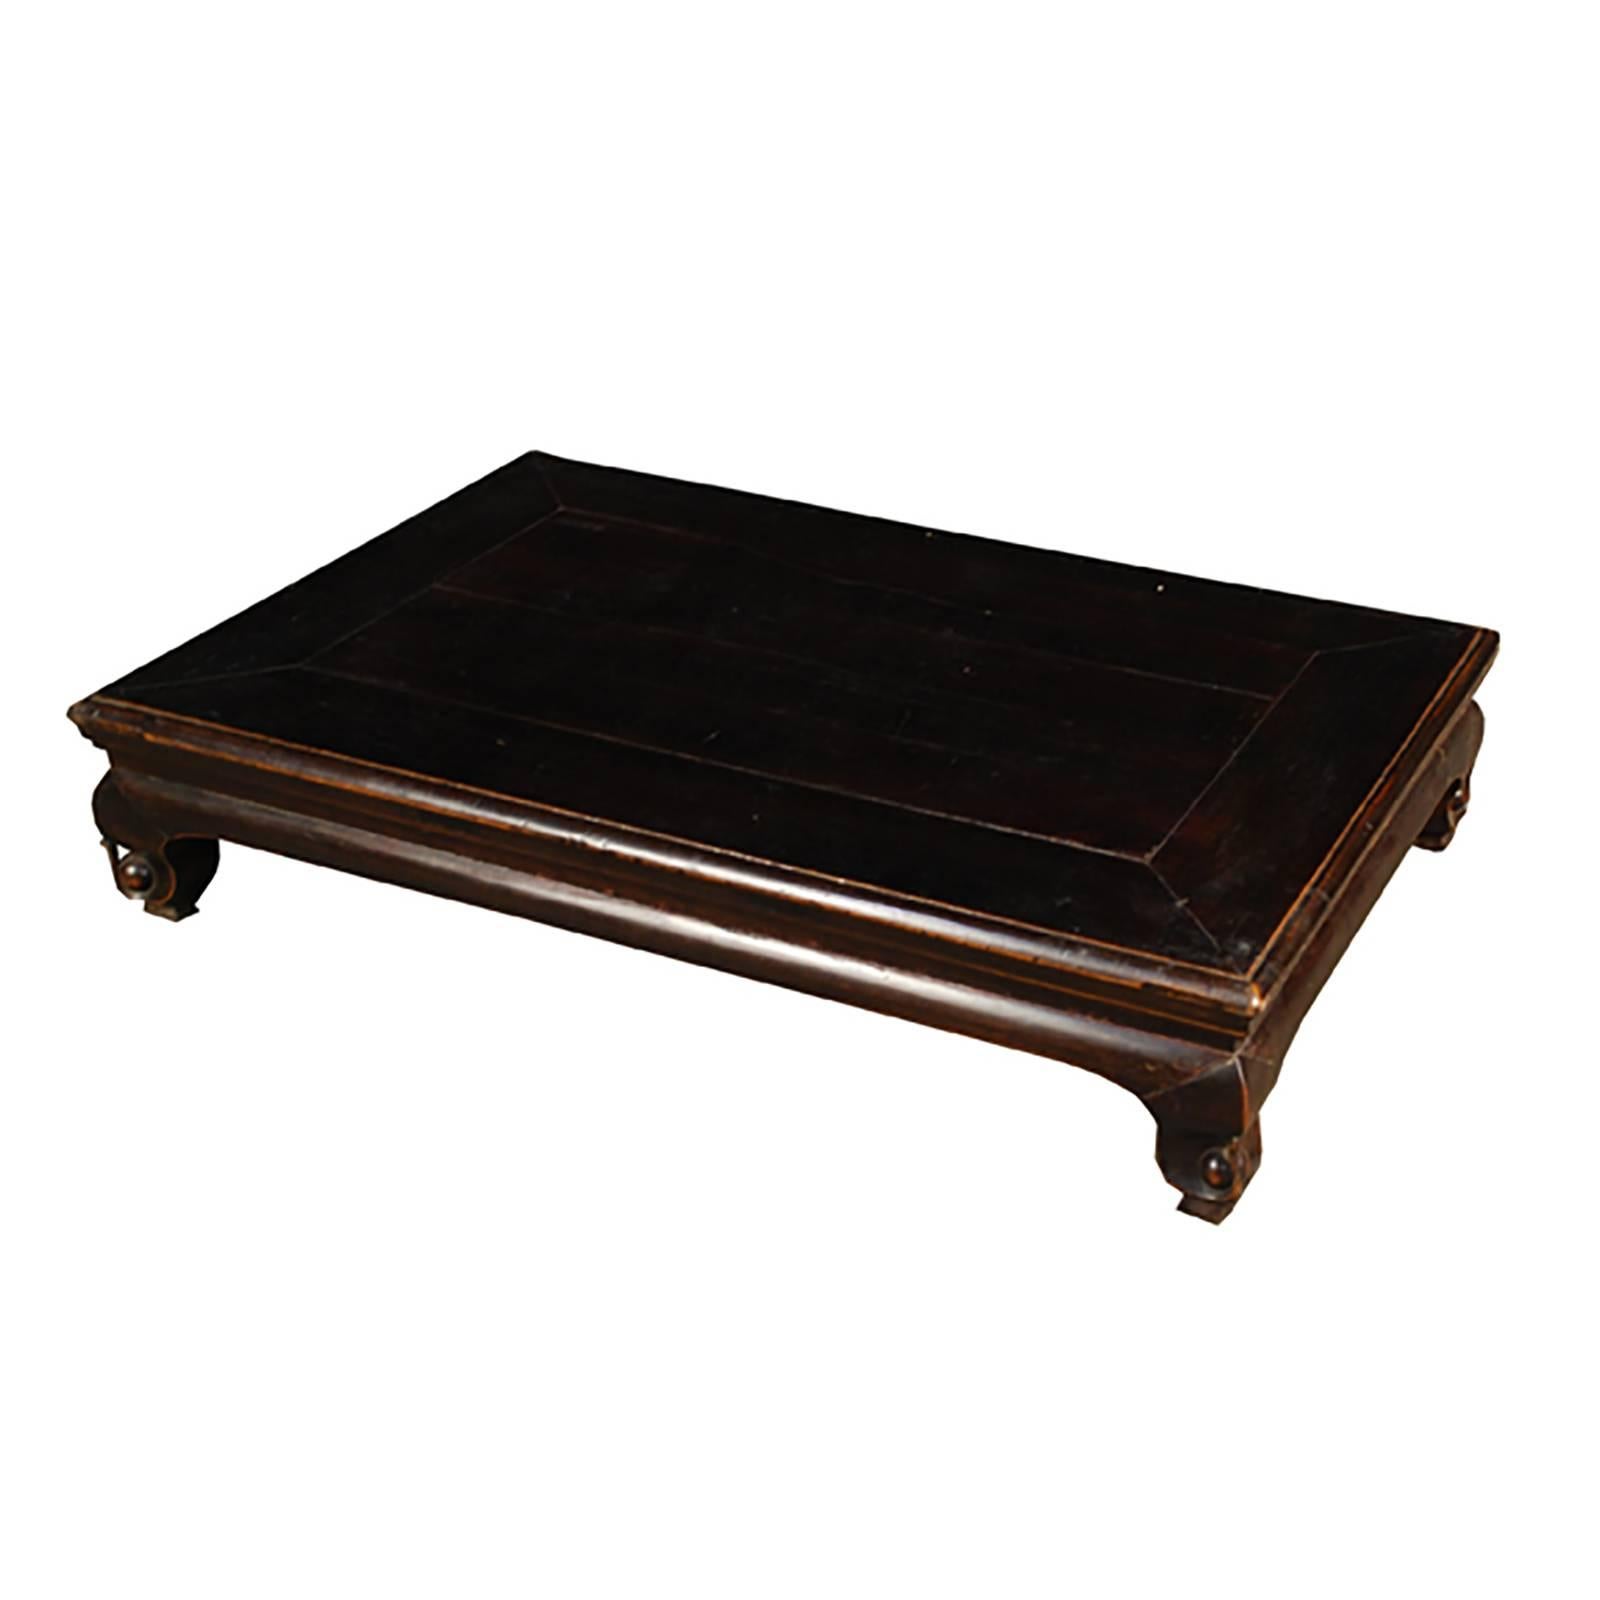 The low-lying kang table, a kind of daybed, provided not only a place to retire but also a space to share tea, a game, or conversation. Deceptively simple, this 19th century table made of northern elmwood reveals its handcrafted artistry in petite